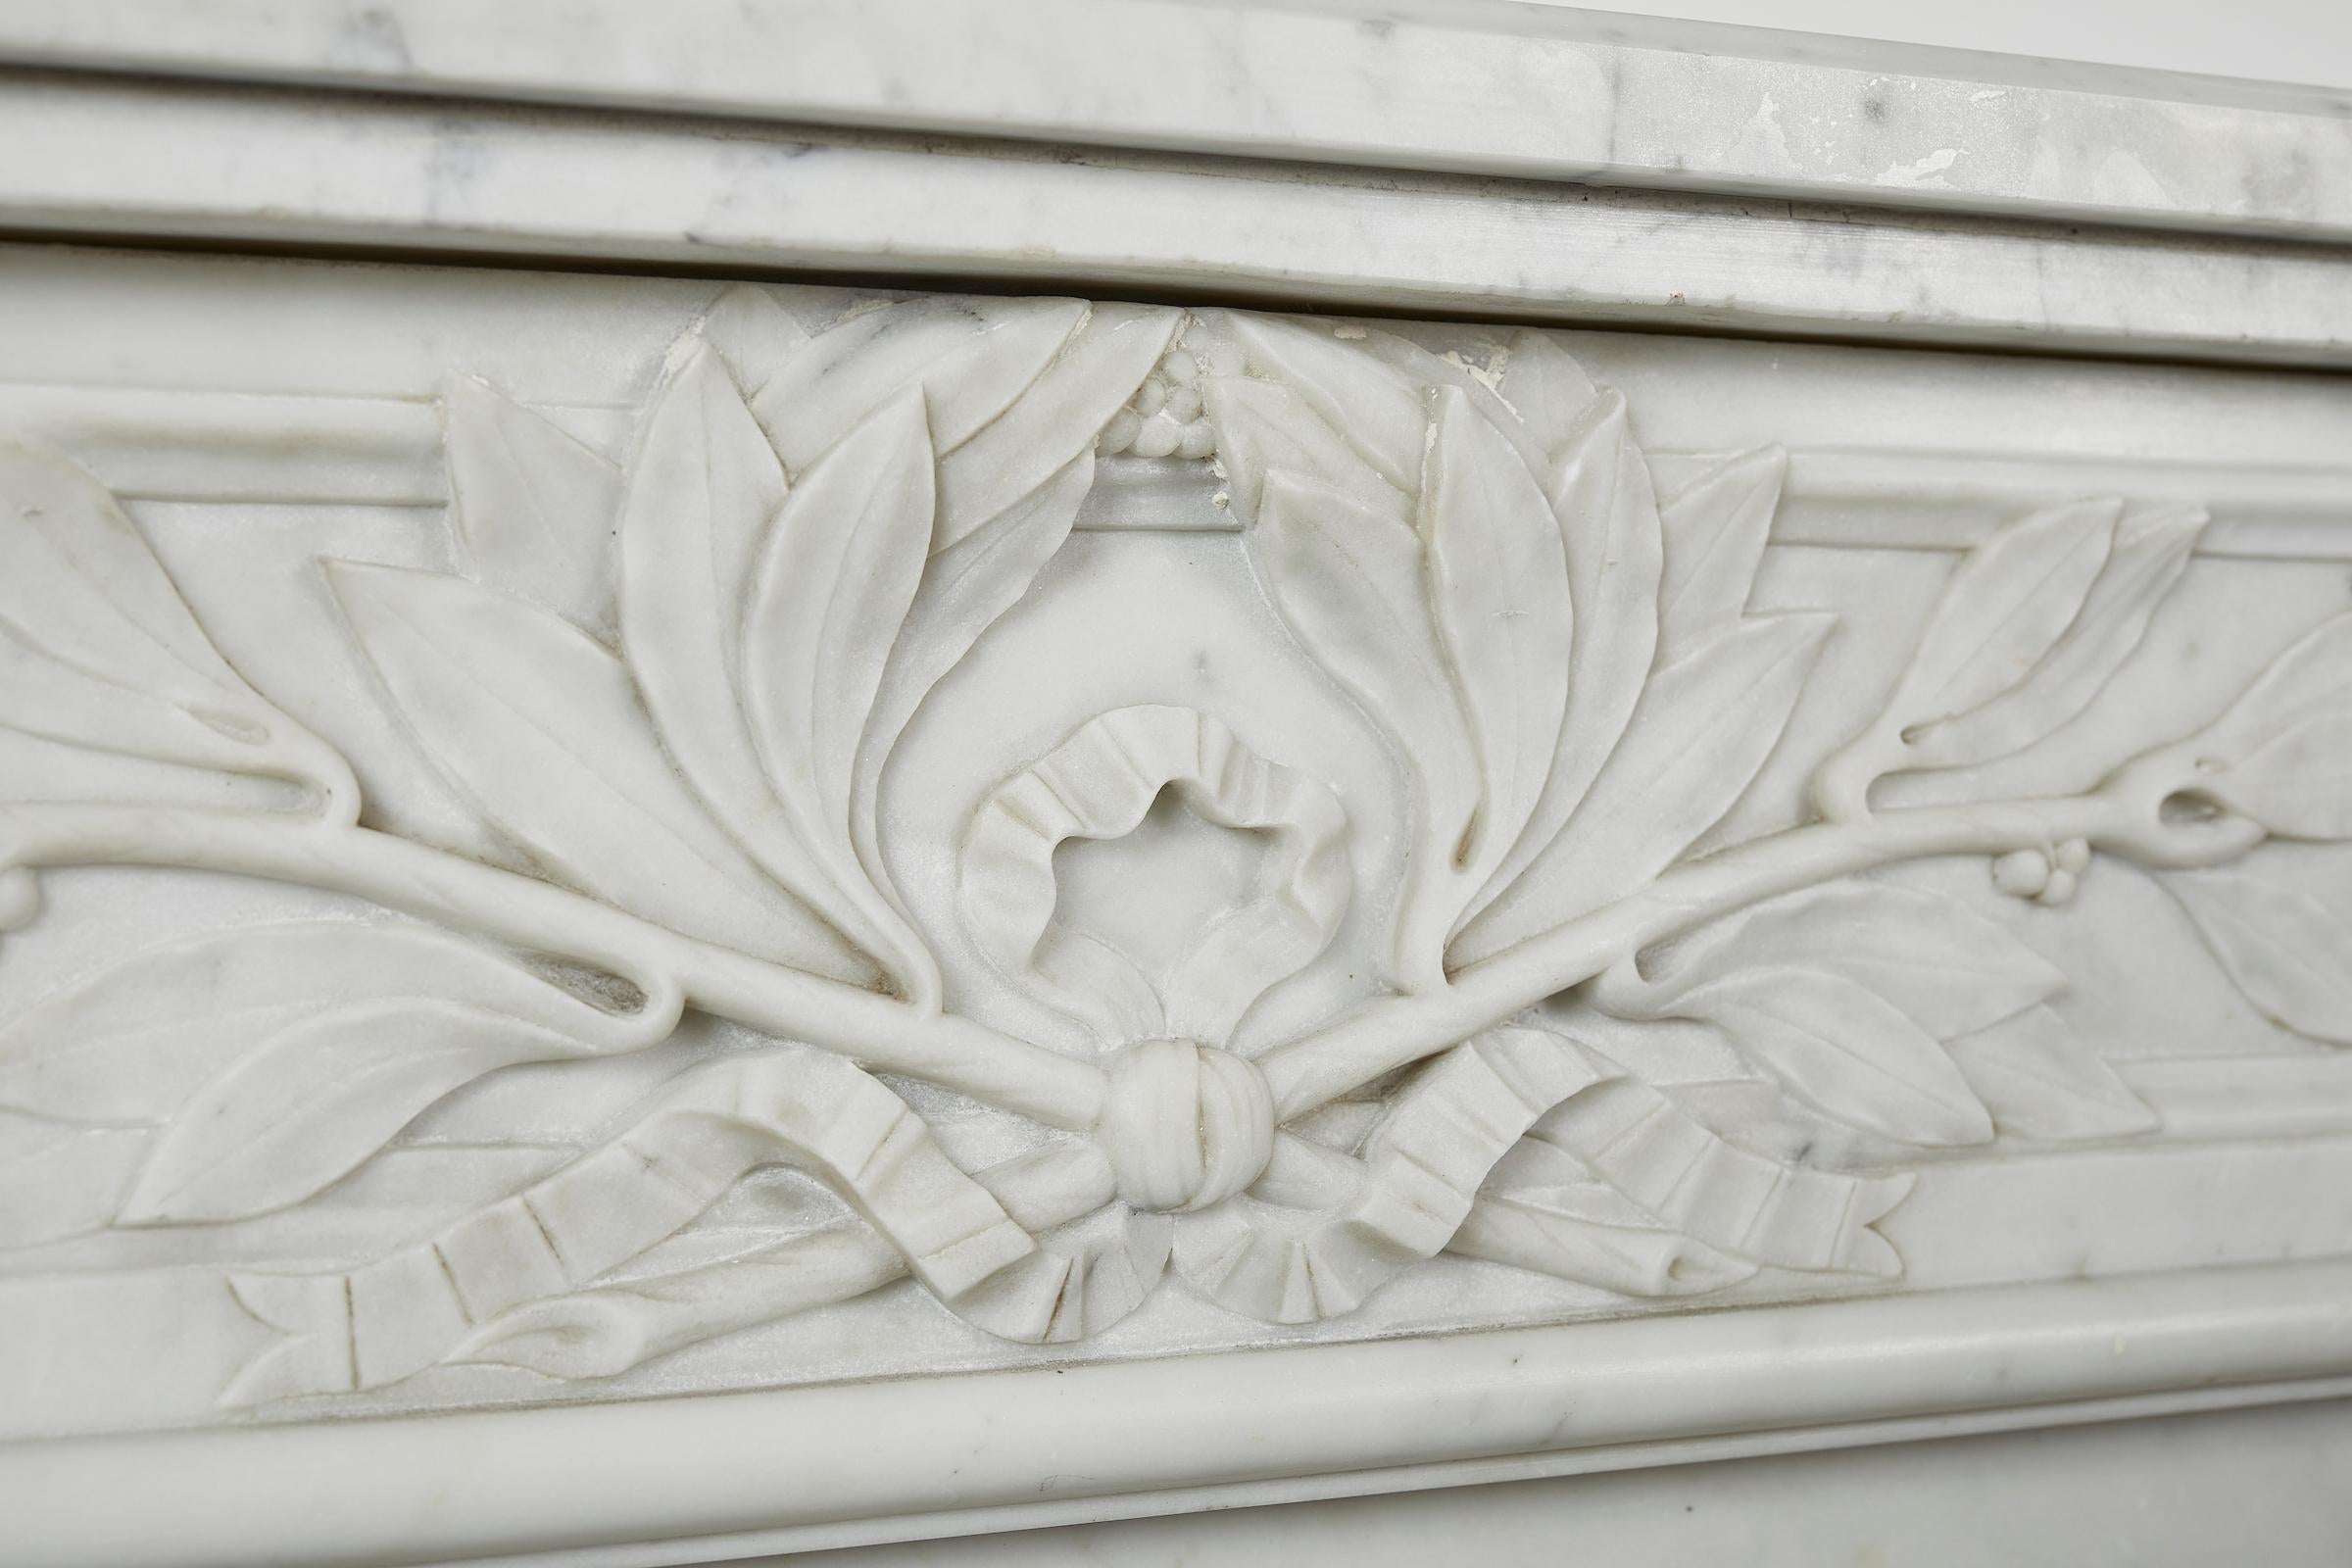 Louis XVI style white Carrara marble mantel (fireplace) with semi columns and olive palm motifs.
Interior dimensions: H 33, W 37.25 in.